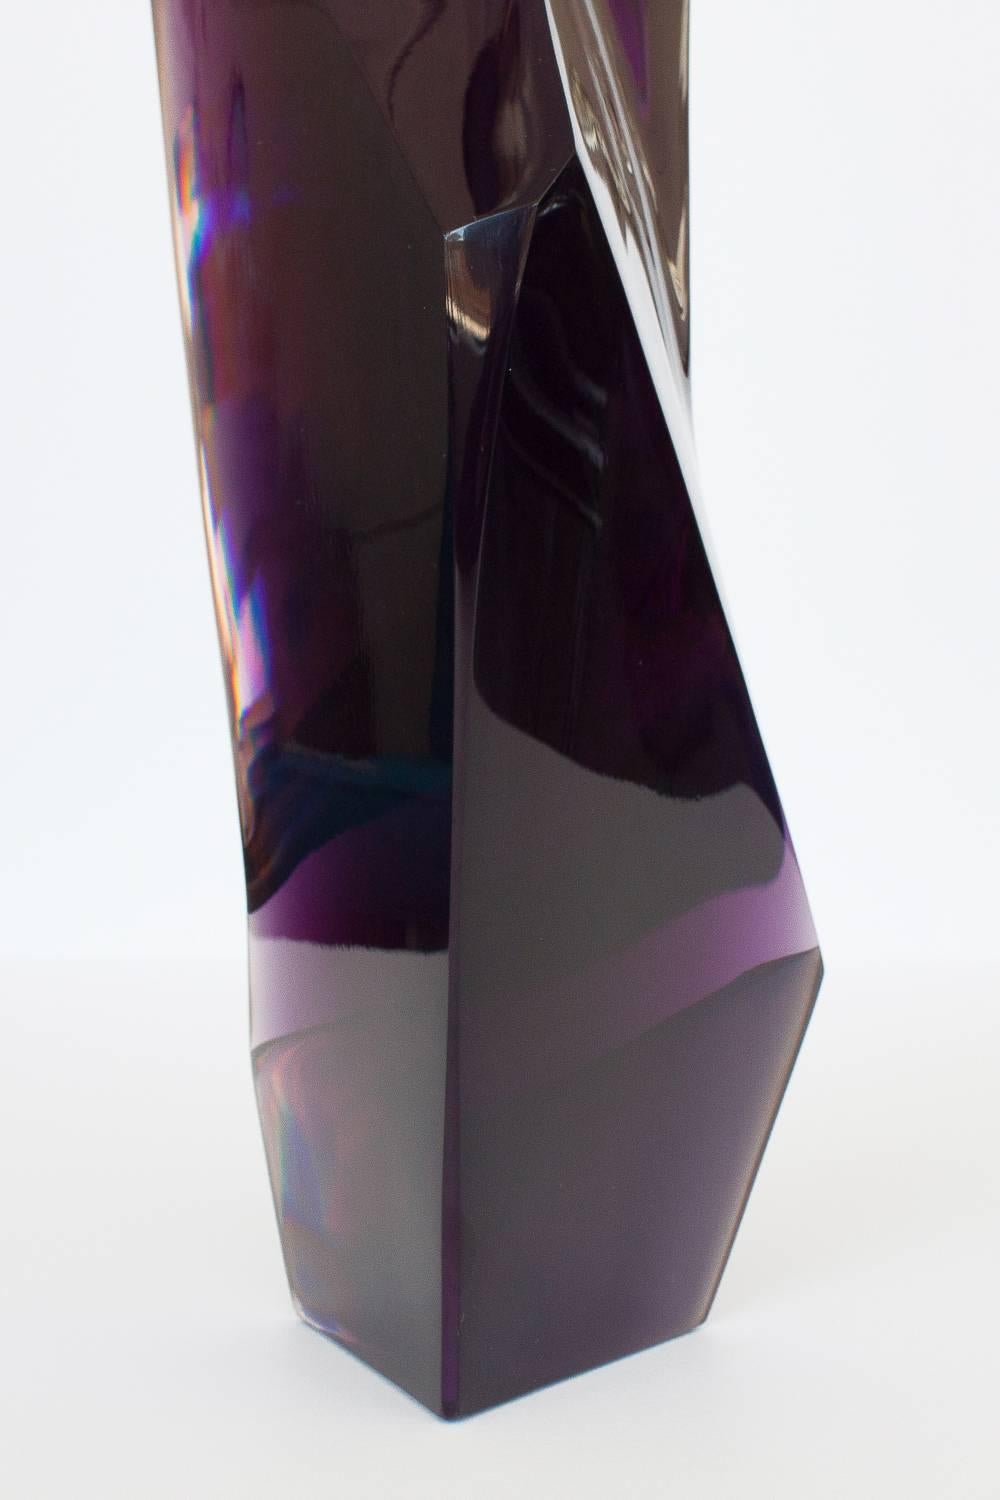 American Faceted Abstract Lucite Resin Sculpture by Louis Von Koelnau